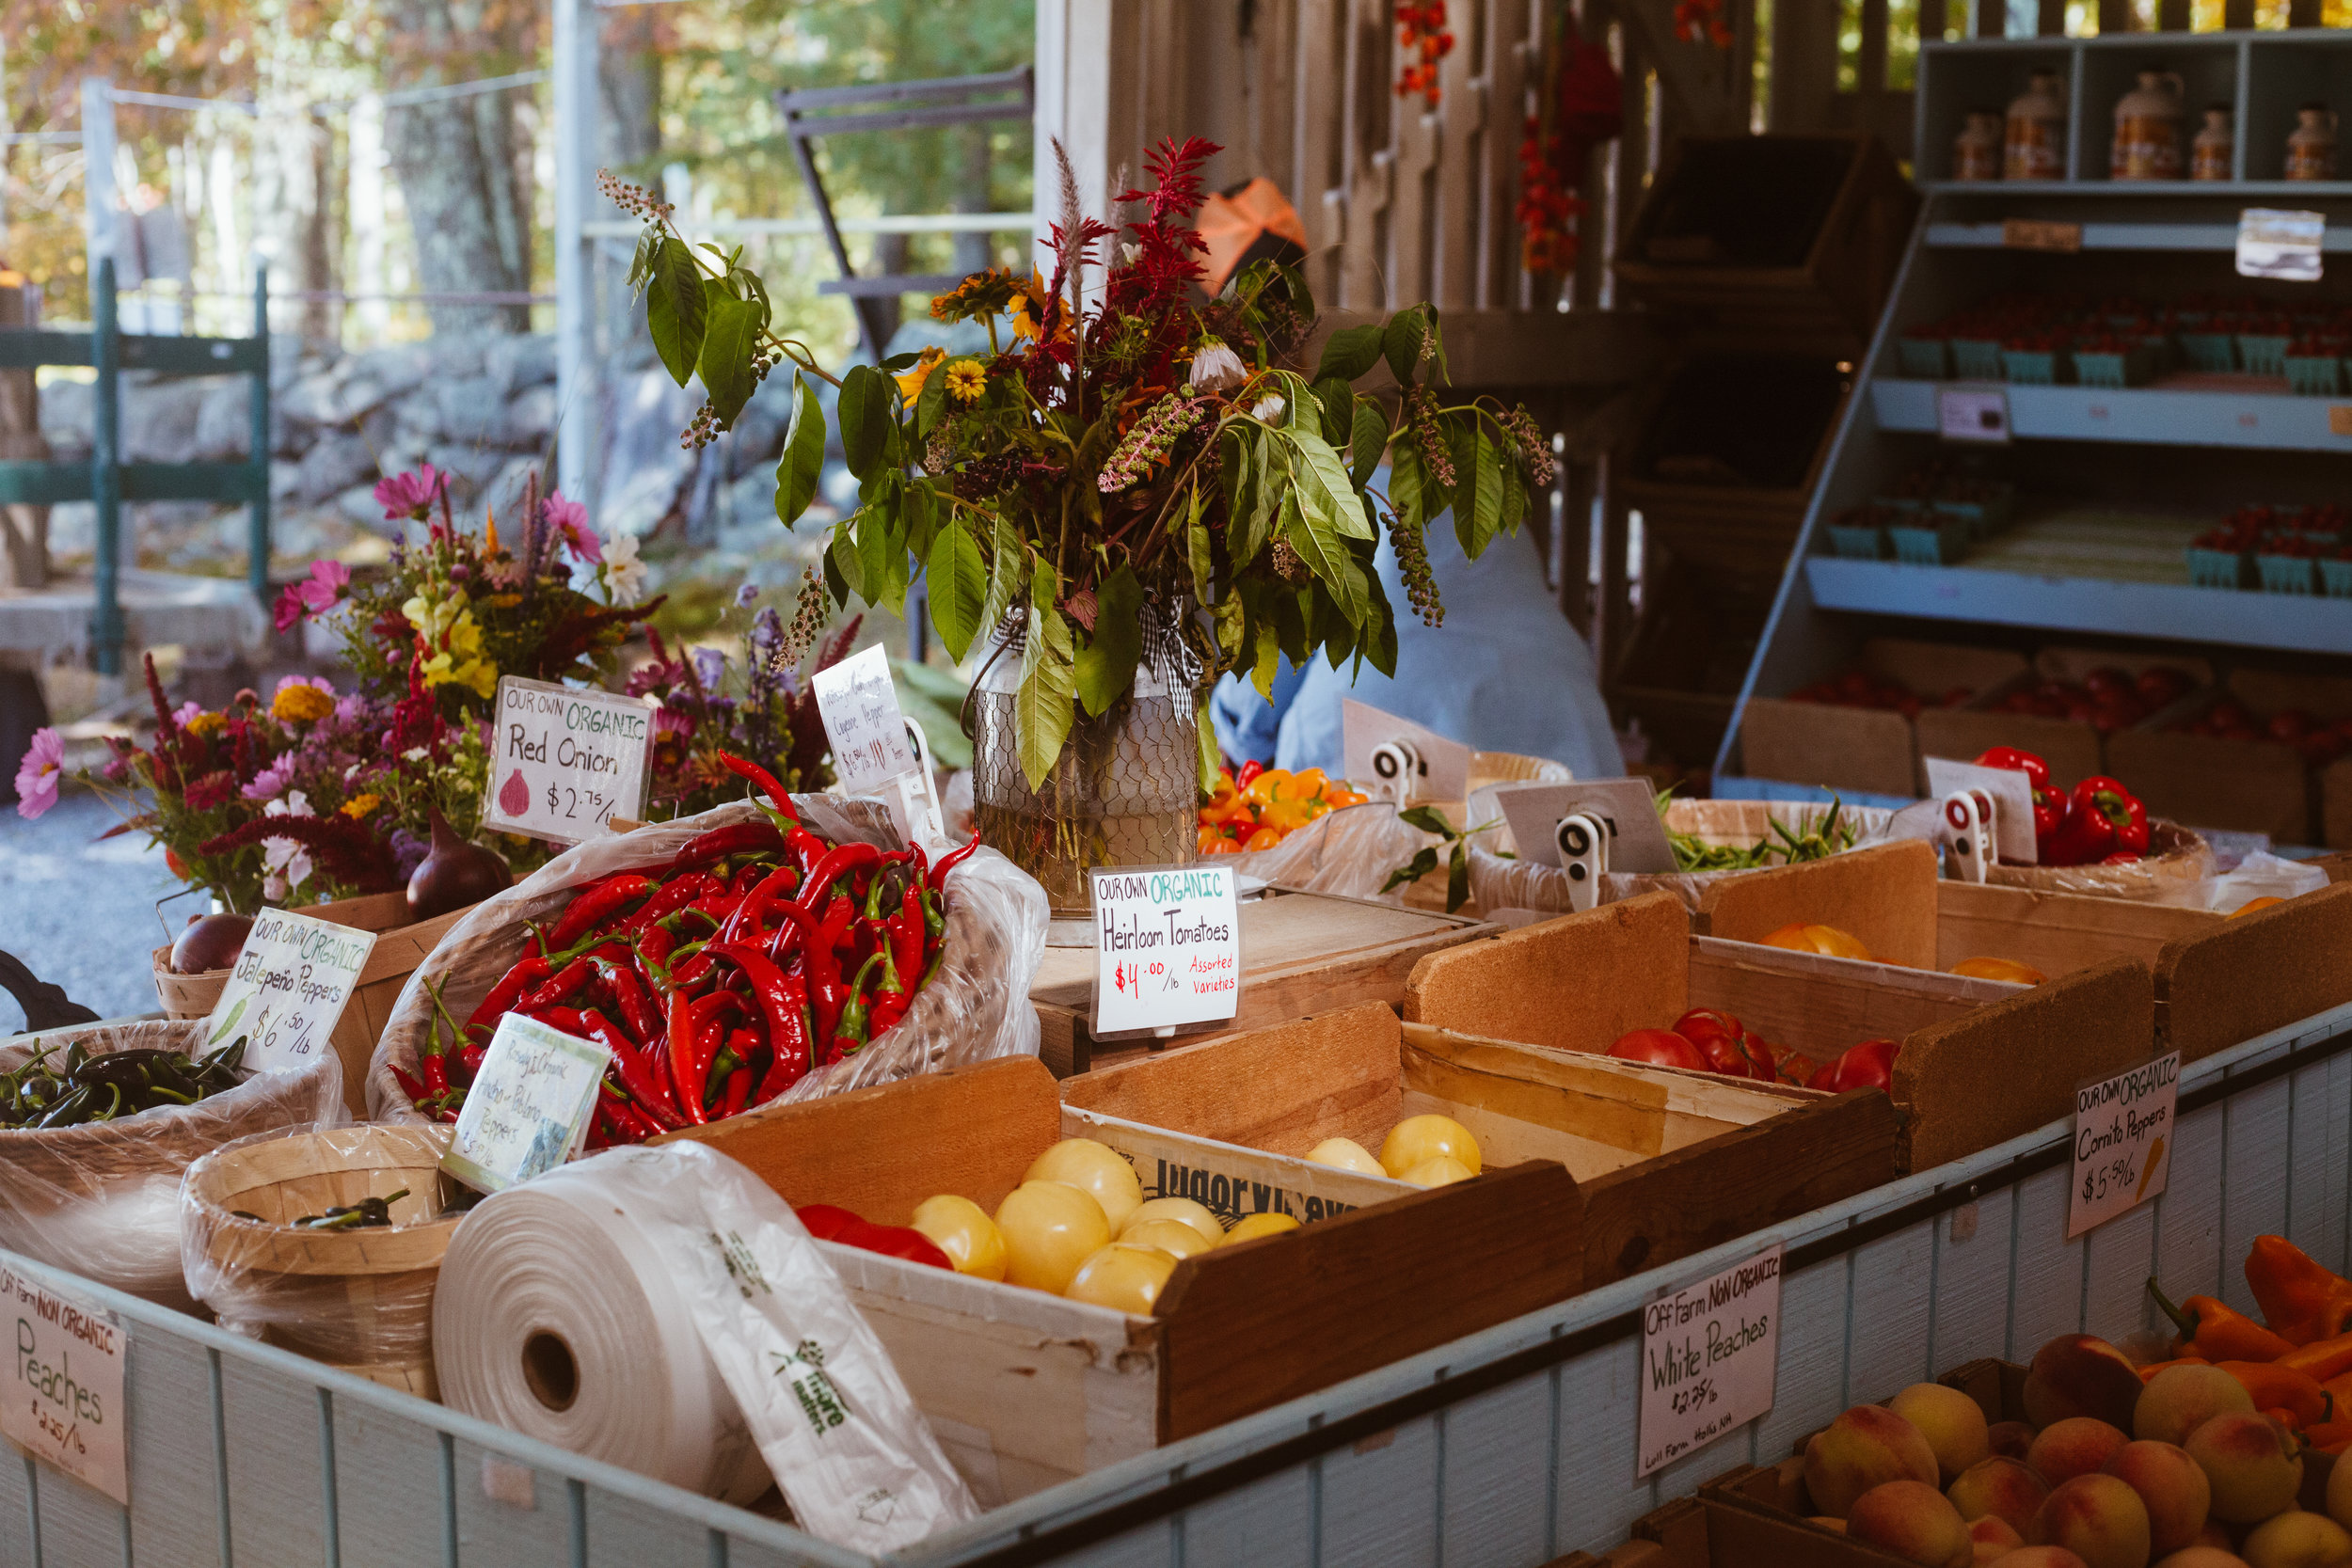 Rosaly's Farm Stand